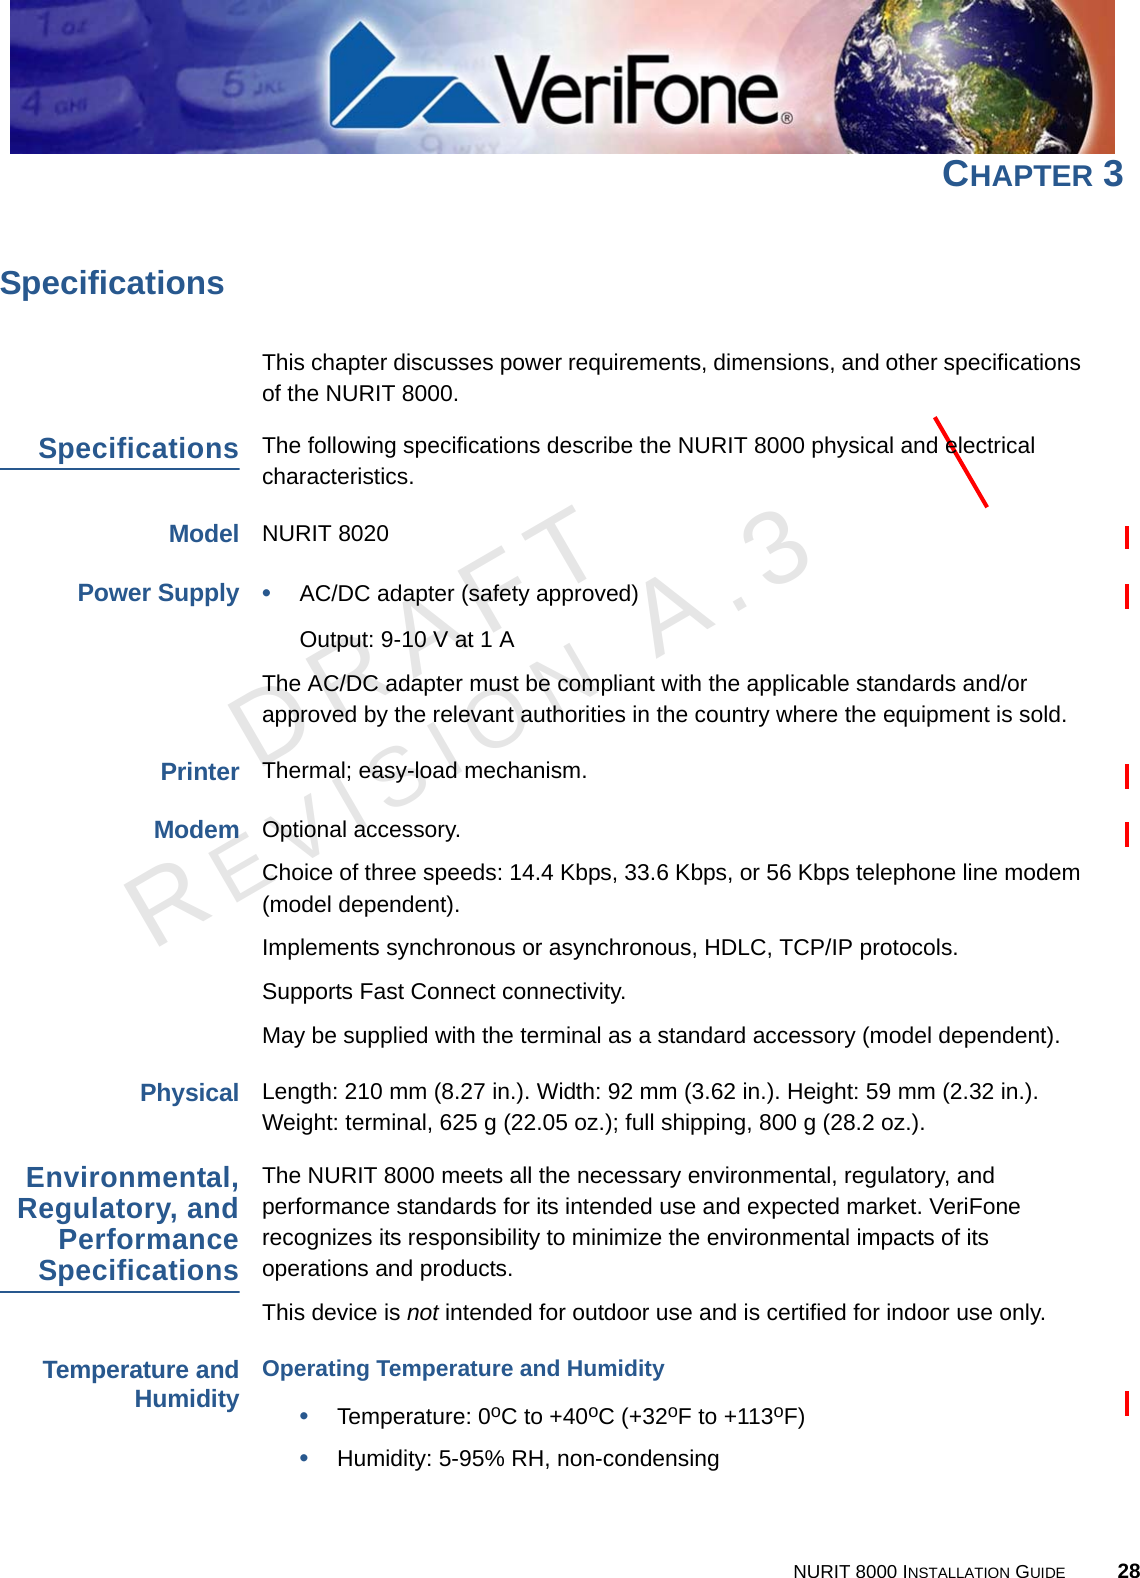 DRAFTREVISION A.3NURIT 8000 INSTALLATION GUIDE 28CHAPTER 3SpecificationsThis chapter discusses power requirements, dimensions, and other specifications of the NURIT 8000.SpecificationsThe following specifications describe the NURIT 8000 physical and electrical characteristics.ModelNURIT 8020Power Supply•AC/DC adapter (safety approved)Output: 9-10 V at 1 AThe AC/DC adapter must be compliant with the applicable standards and/or approved by the relevant authorities in the country where the equipment is sold.PrinterThermal; easy-load mechanism.ModemOptional accessory.Choice of three speeds: 14.4 Kbps, 33.6 Kbps, or 56 Kbps telephone line modem (model dependent).Implements synchronous or asynchronous, HDLC, TCP/IP protocols.Supports Fast Connect connectivity.May be supplied with the terminal as a standard accessory (model dependent).PhysicalLength: 210 mm (8.27 in.). Width: 92 mm (3.62 in.). Height: 59 mm (2.32 in.). Weight: terminal, 625 g (22.05 oz.); full shipping, 800 g (28.2 oz.).Environmental,Regulatory, andPerformanceSpecificationsThe NURIT 8000 meets all the necessary environmental, regulatory, and performance standards for its intended use and expected market. VeriFone recognizes its responsibility to minimize the environmental impacts of its operations and products.This device is not intended for outdoor use and is certified for indoor use only.Temperature andHumidityOperating Temperature and Humidity•Temperature: 0oC to +40oC (+32oF to +113oF)•Humidity: 5-95% RH, non-condensing